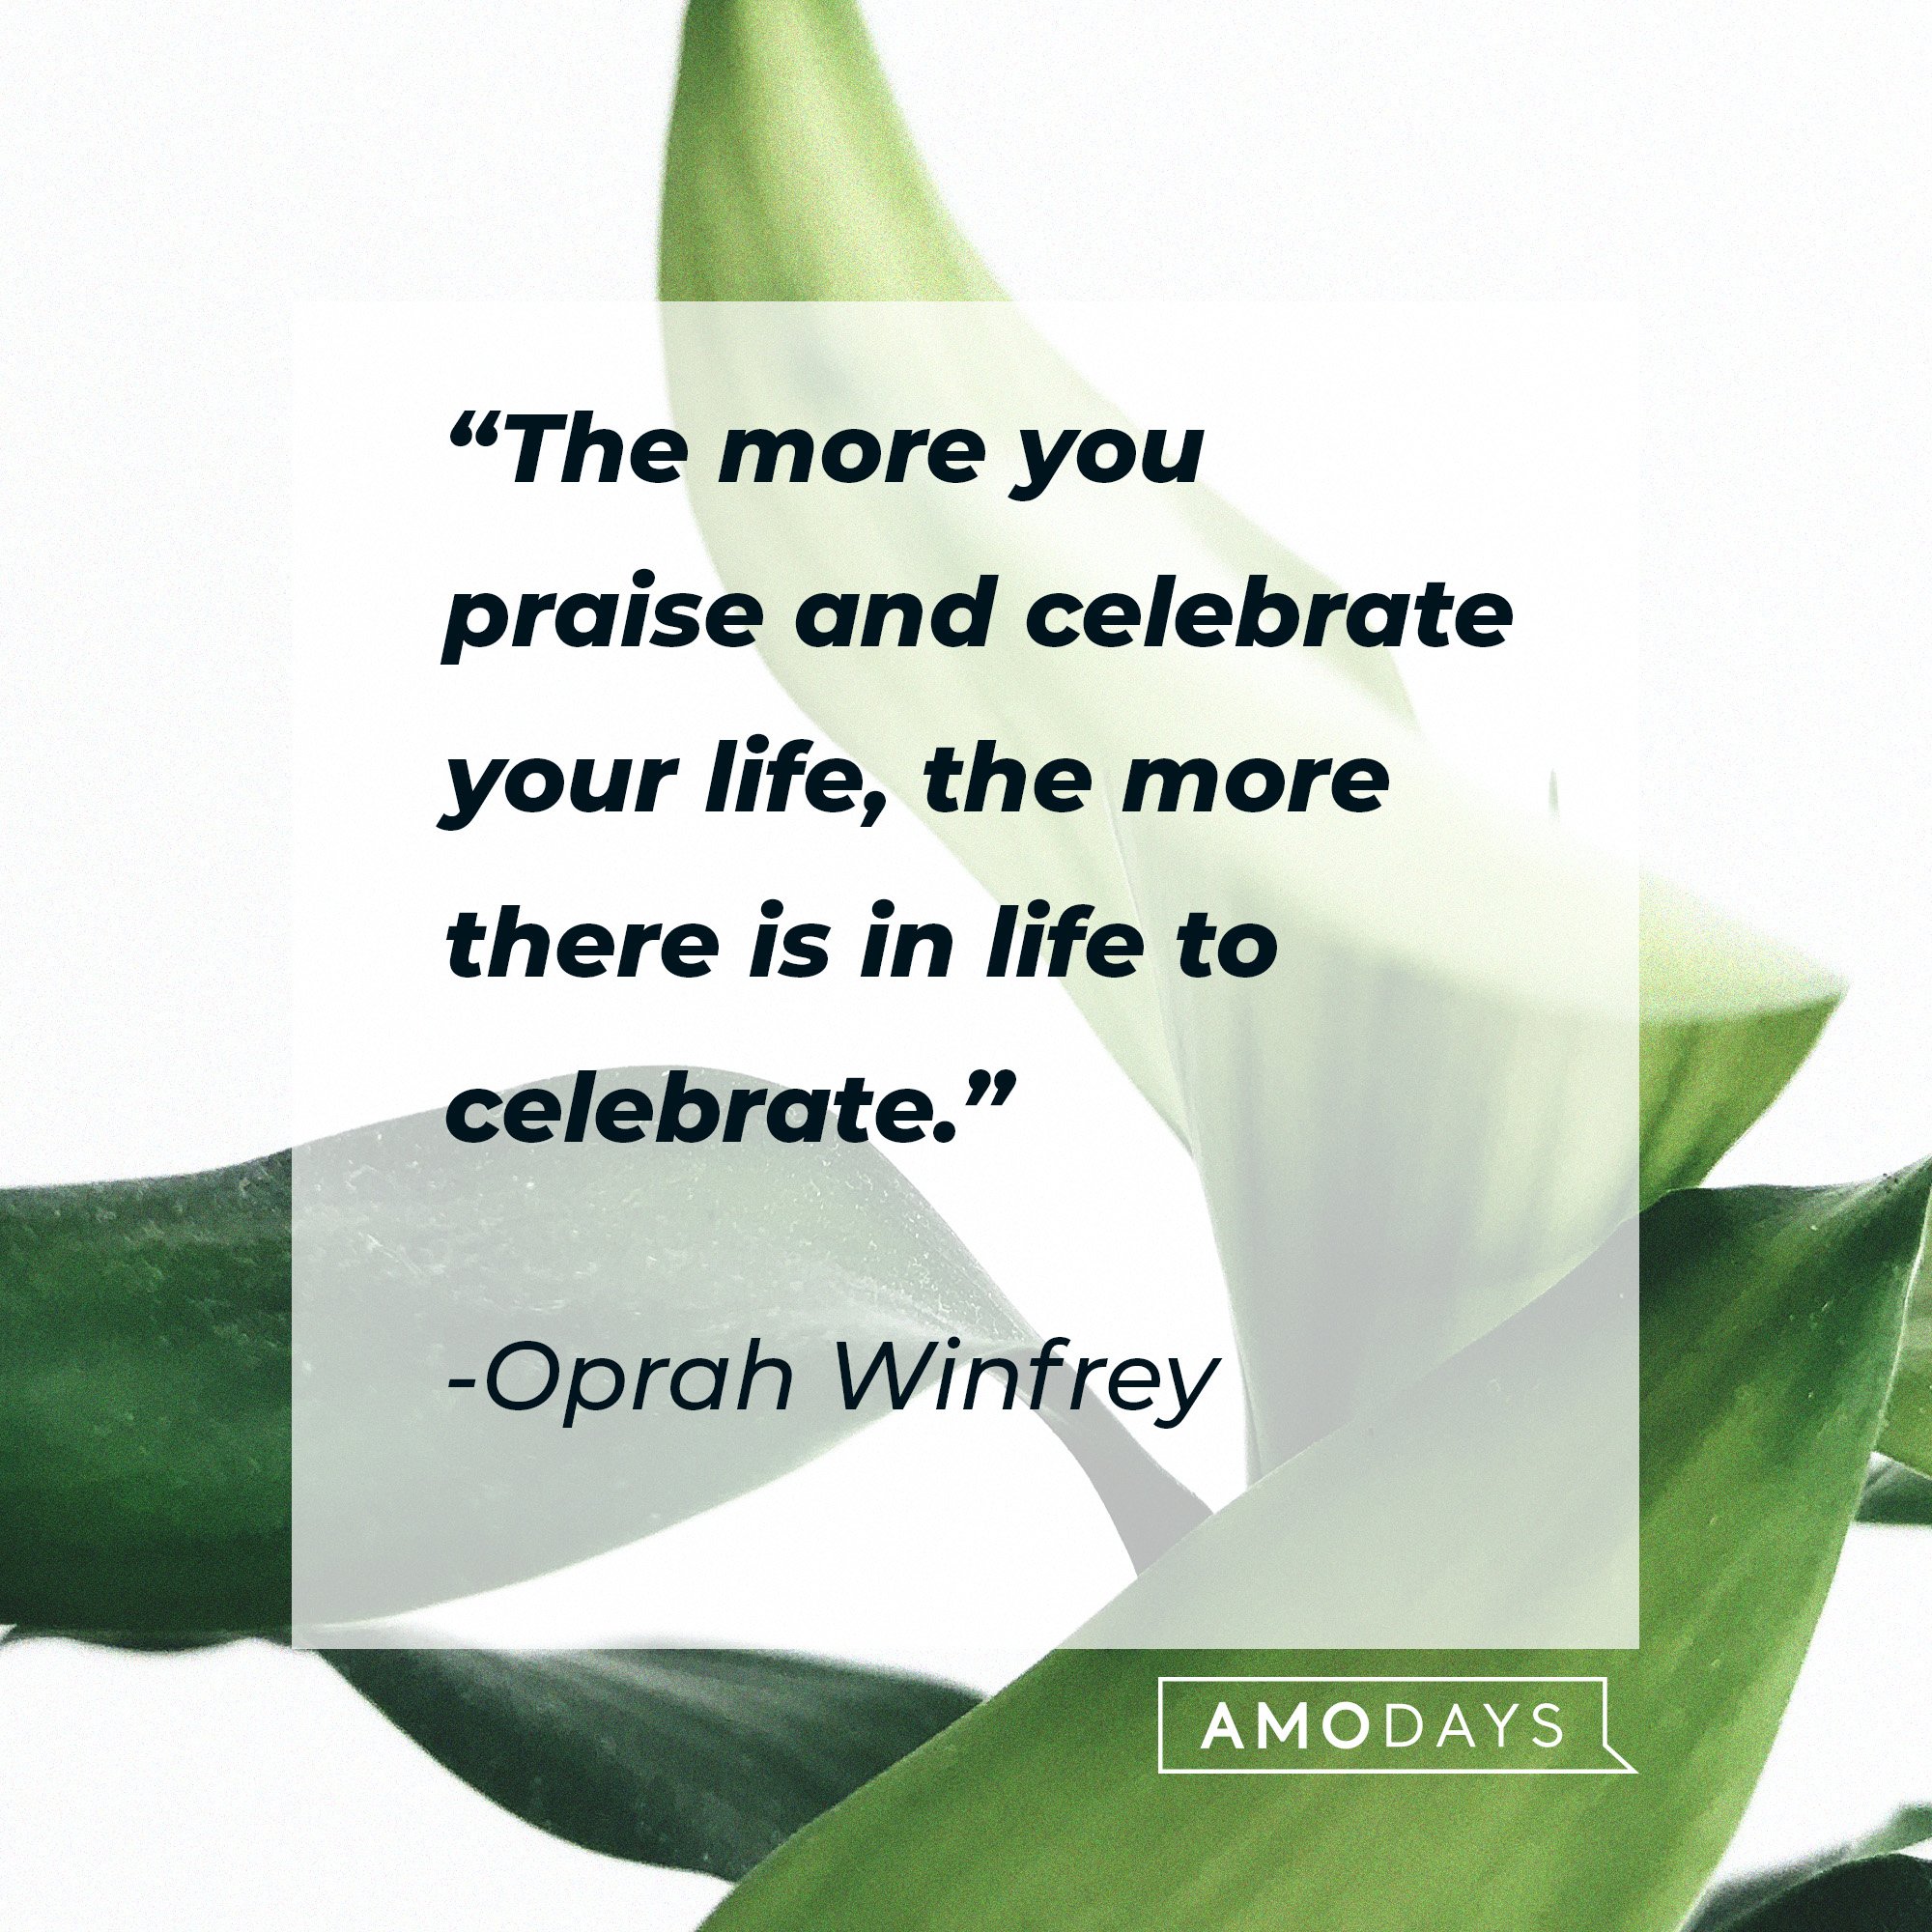 Oprah Winfrey's quote: “The more you praise and celebrate your life, the more there is in life to celebrate.” | Image: AmoDays